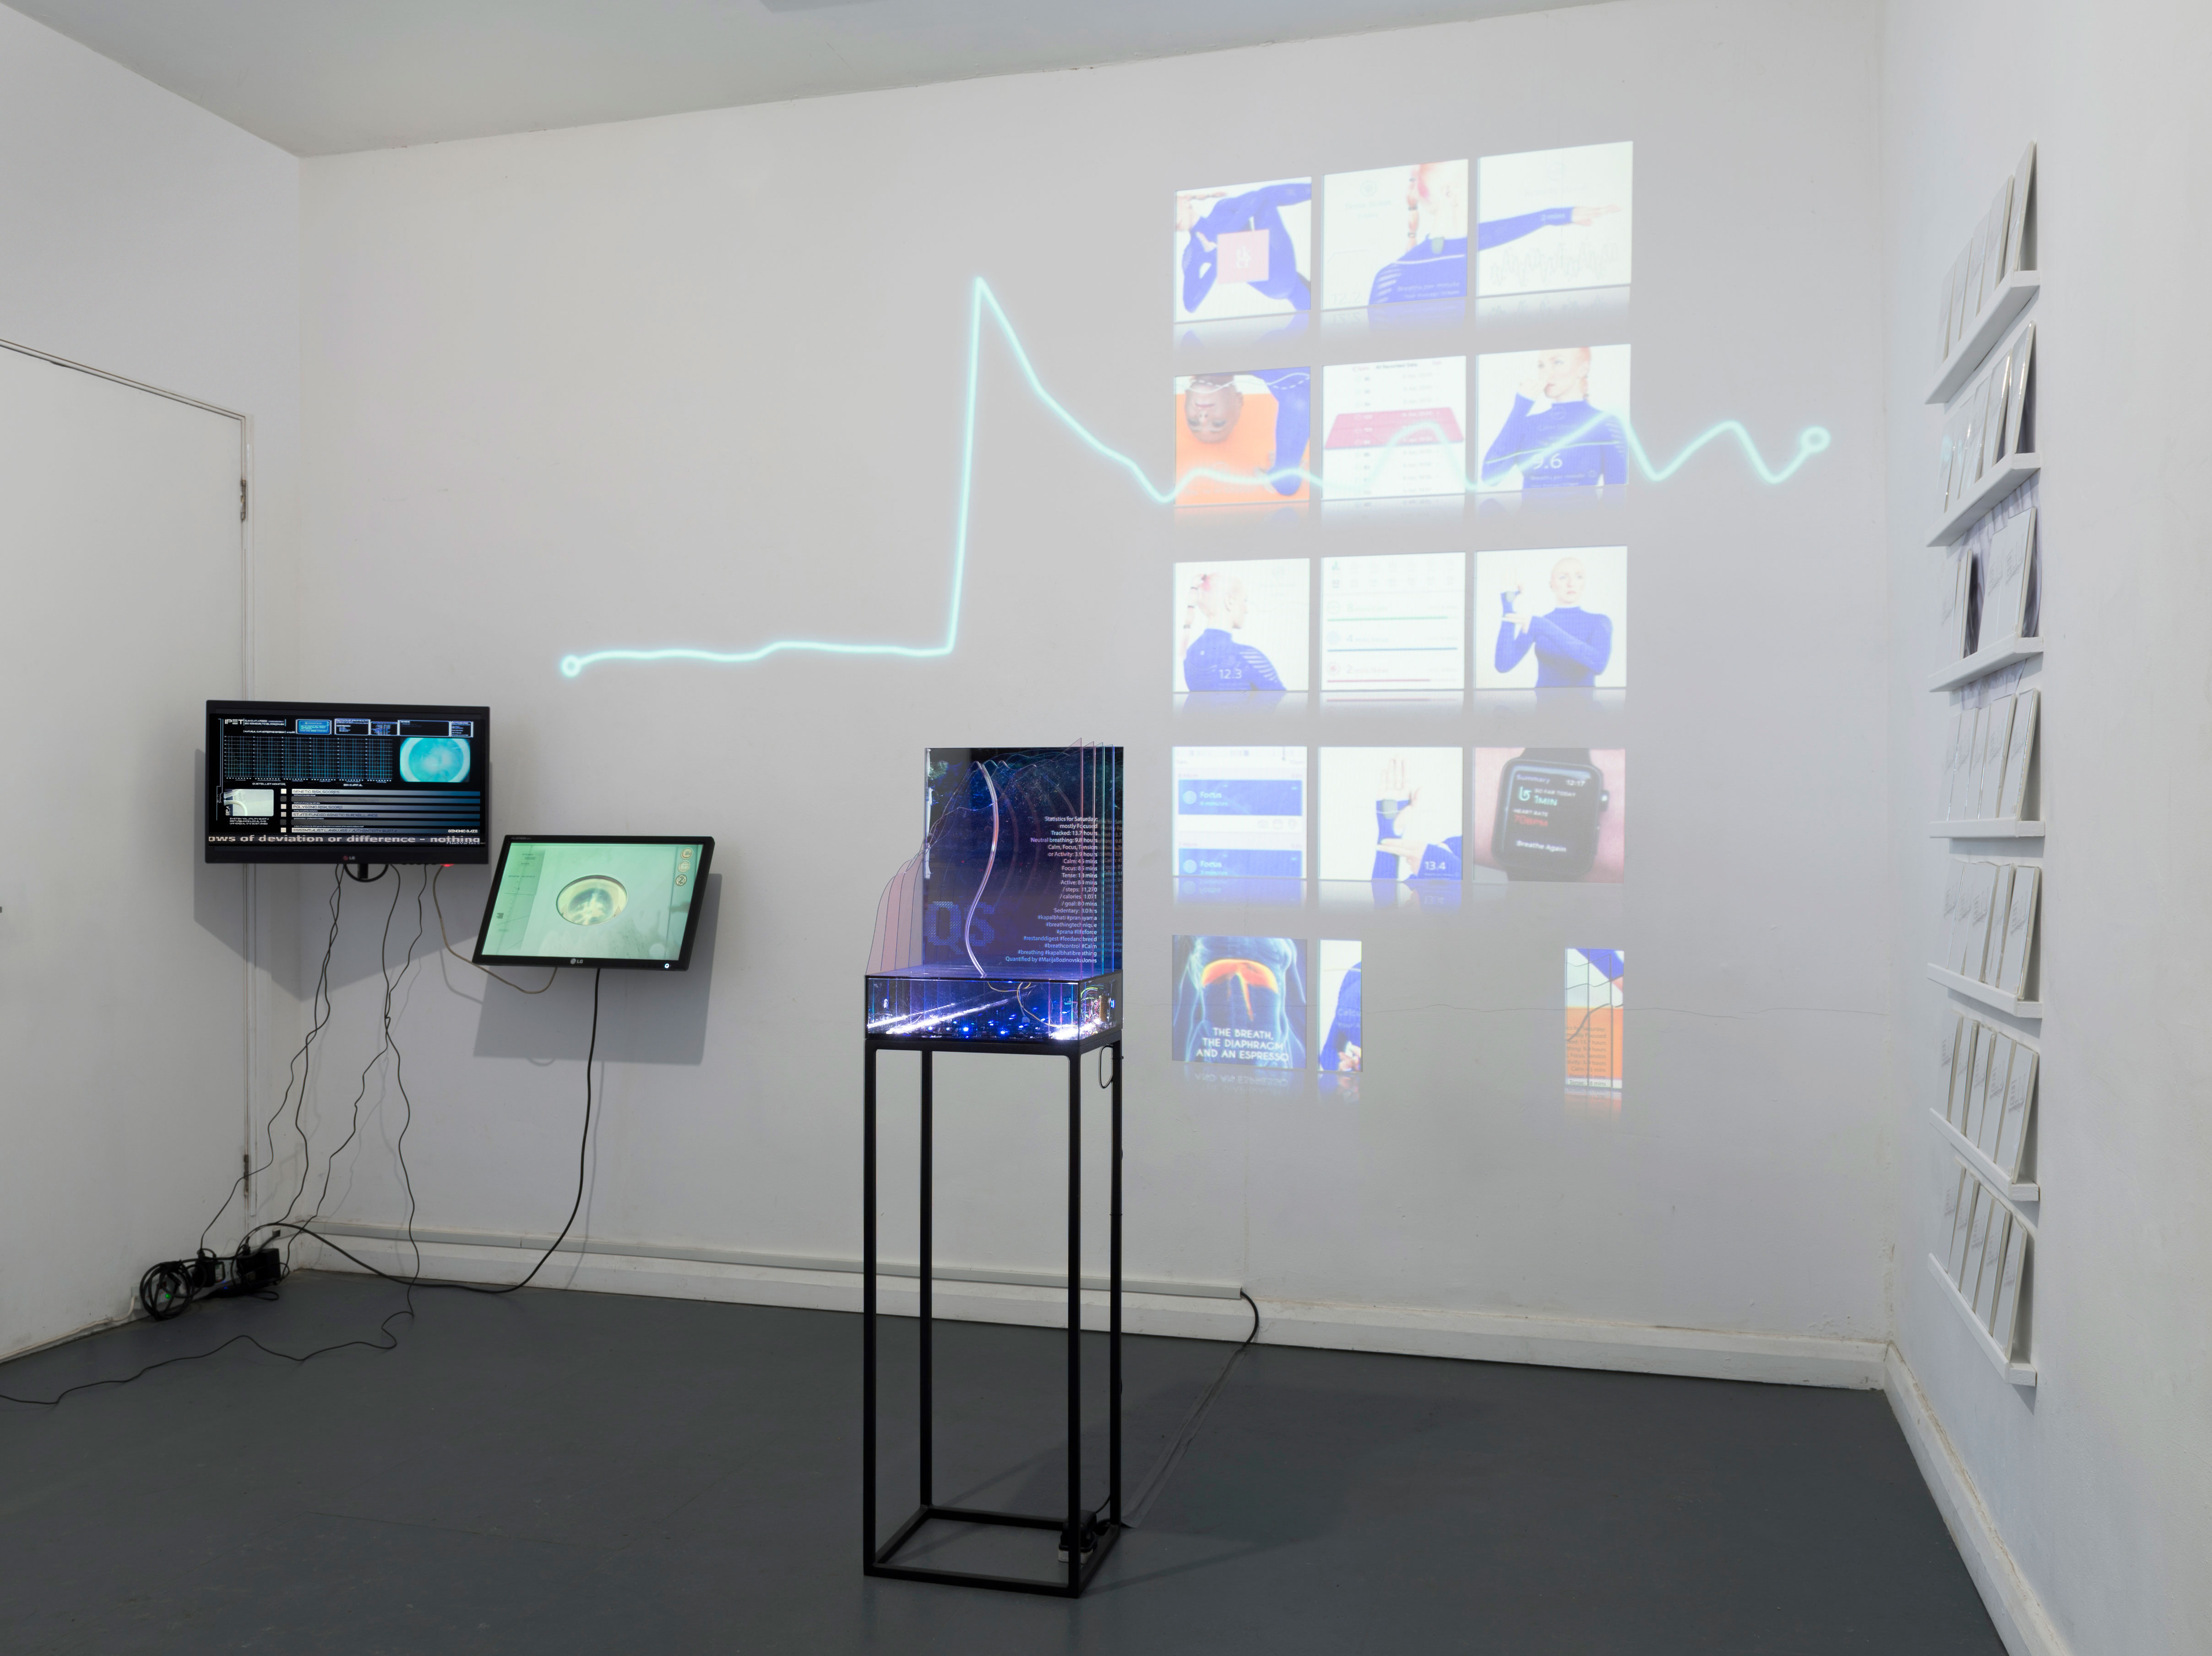 “de-leb” data as currency, the currency of data at Banner Repeater in London